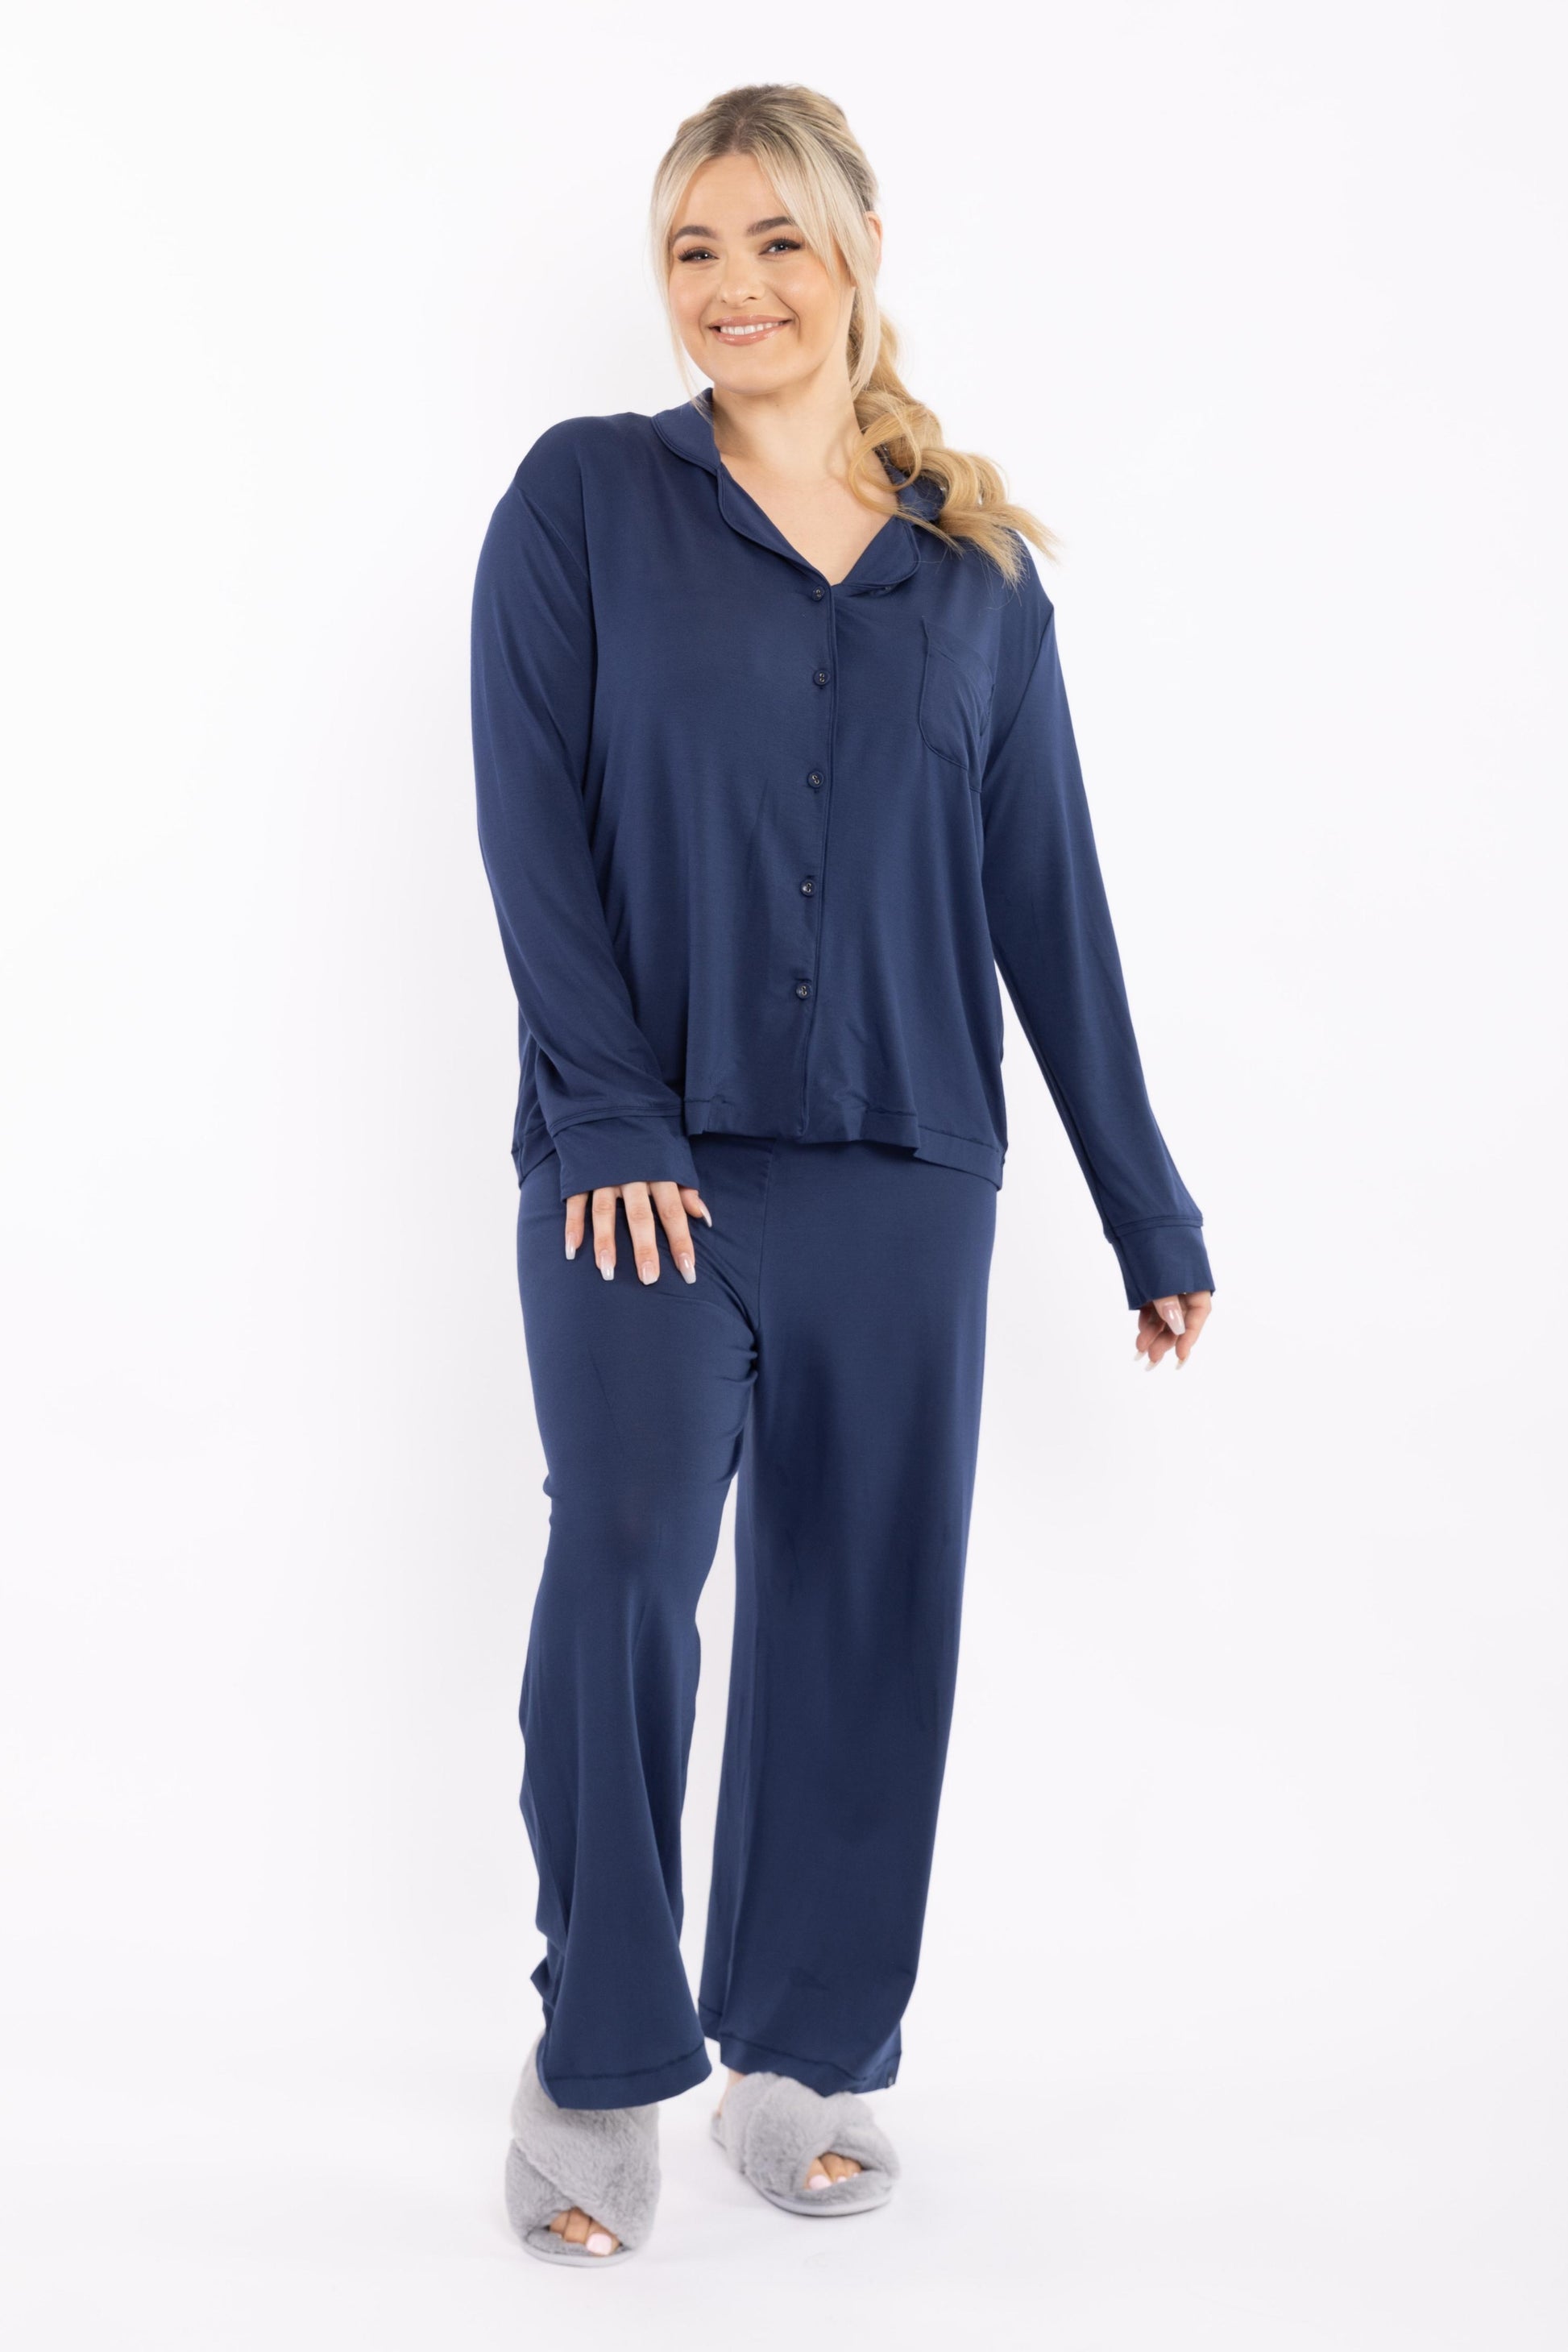 Wanting a good nights sleep? Relax in style and slip into our PJ pants made from a lightweight, cooling Jersey fabric. Pair with the PJ top for the perfect set.